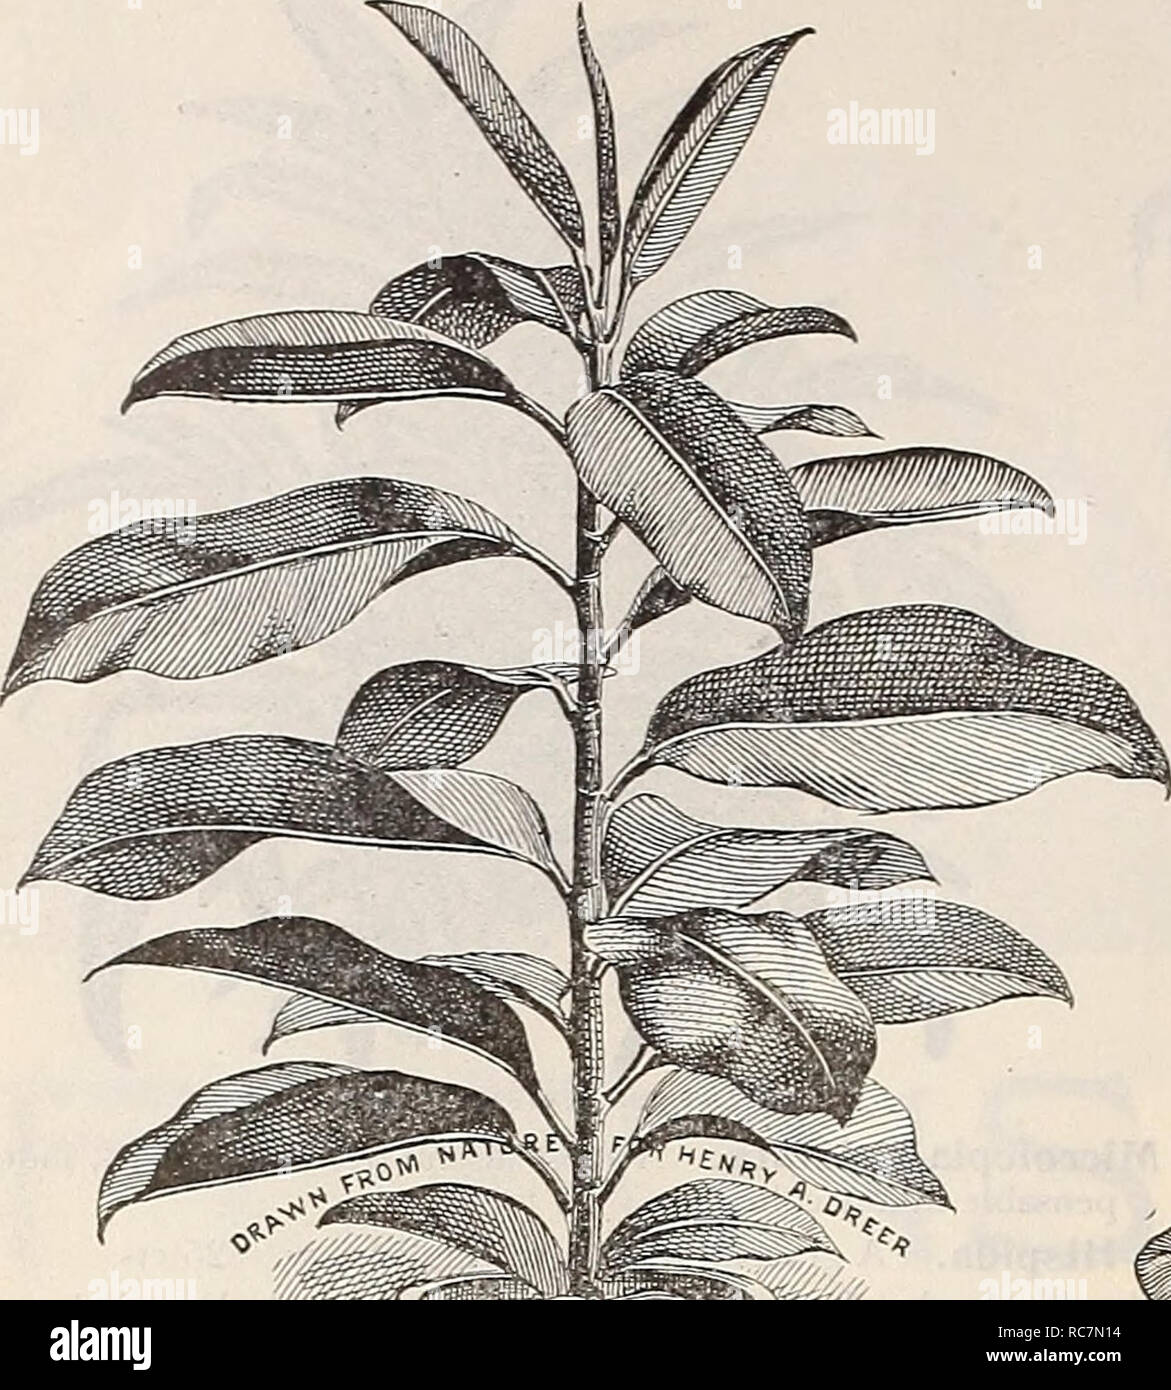 . Dreer's garden calendar : 1899. Seeds Catalogs; Nursery stock Catalogs; Gardening Equipment and supplies Catalogs; Flowers Seeds Catalogs; Vegetables Seeds Catalogs; Fruit Seeds Catalogs. 120 DREER'S SELECT LIST.. rlC/US. (Rubber Plant. Farfugidm Gran Ficus Elastica (RrBBER Plant). FUCHSIAS. Well-known favorites for planting out in partially shaded positions during the Summer, or for Winter flowering in the window or greenhouse through the Winter. The following collection is a selection of the finest of the new and old varieties. Varieties marked with an &quot;*&quot; are double flowering. A Stock Photo